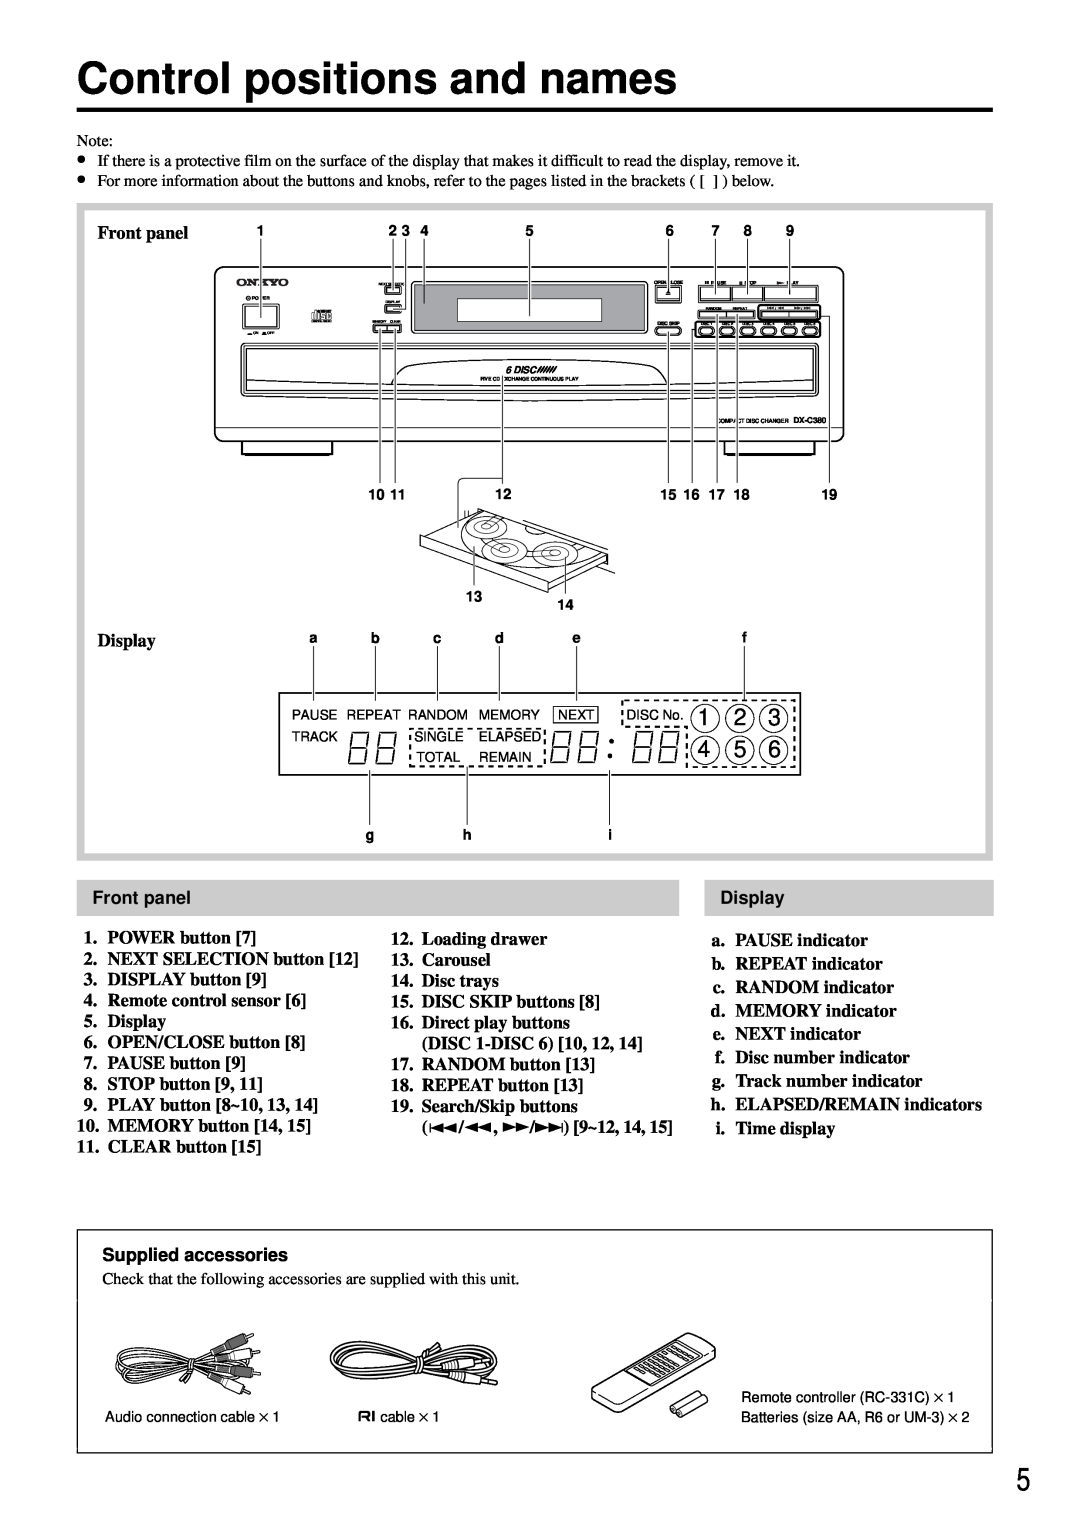 Onkyo DX-C380 instruction manual Control positions and names, Front panel, Display, Supplied accessories 